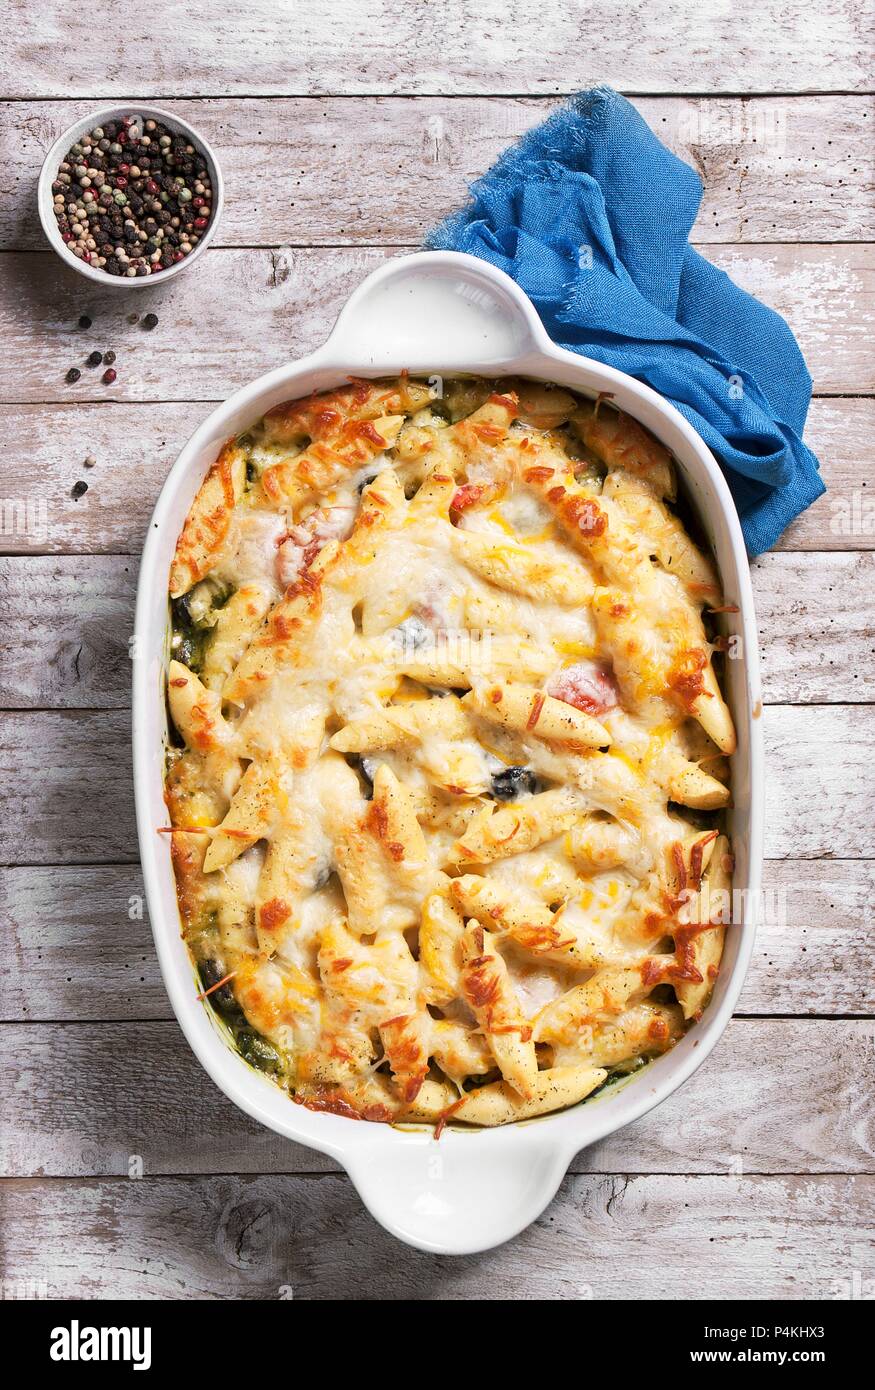 Pasta bake with cheese and spinach Stock Photo